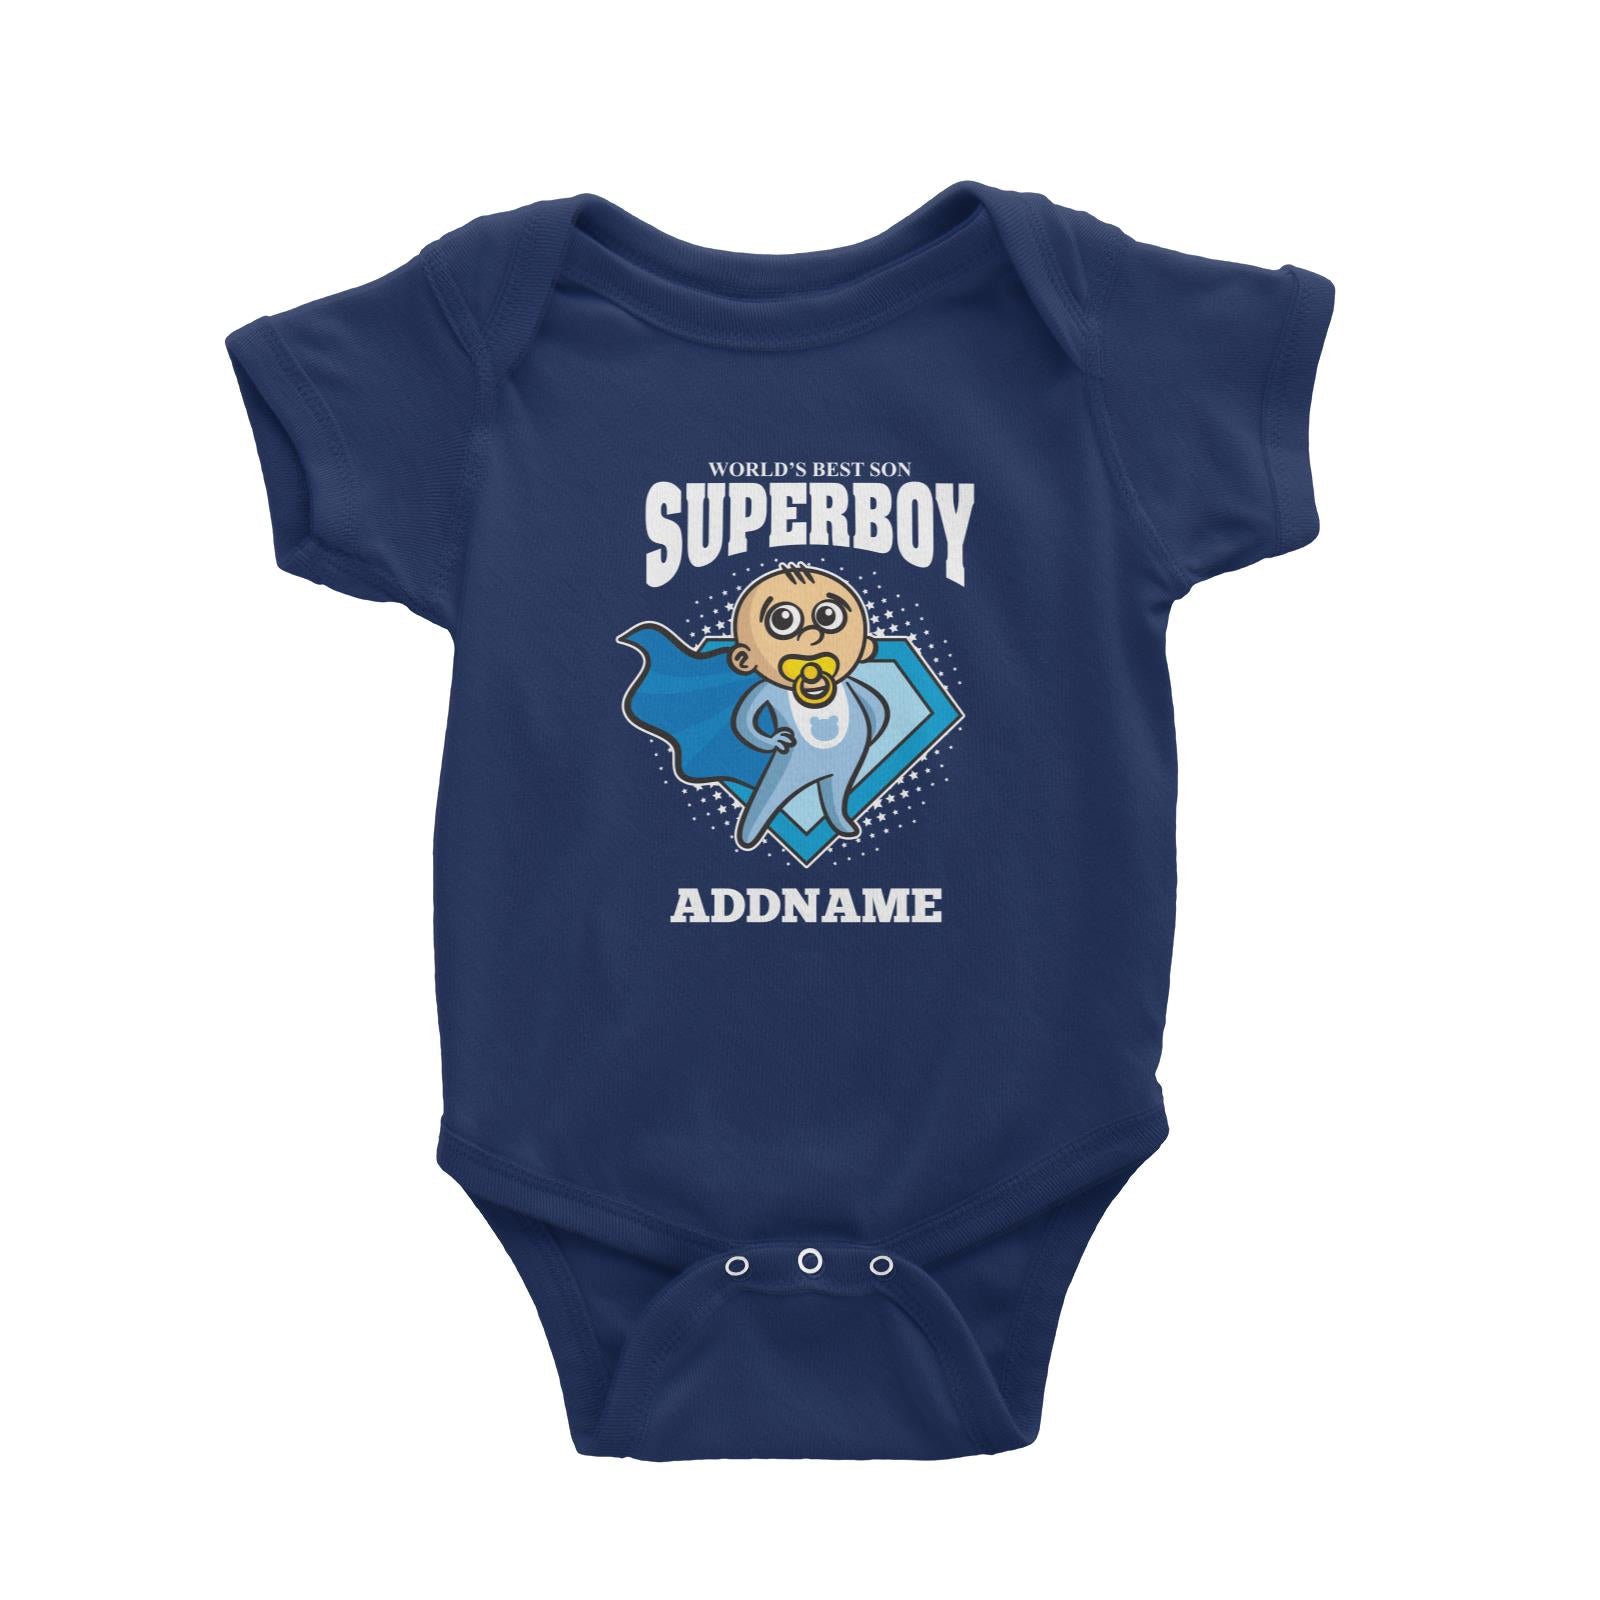 Best Son Superboy Baby Baby Romper Personalizable Designs Matching Family Superhero Family Edition Superhero